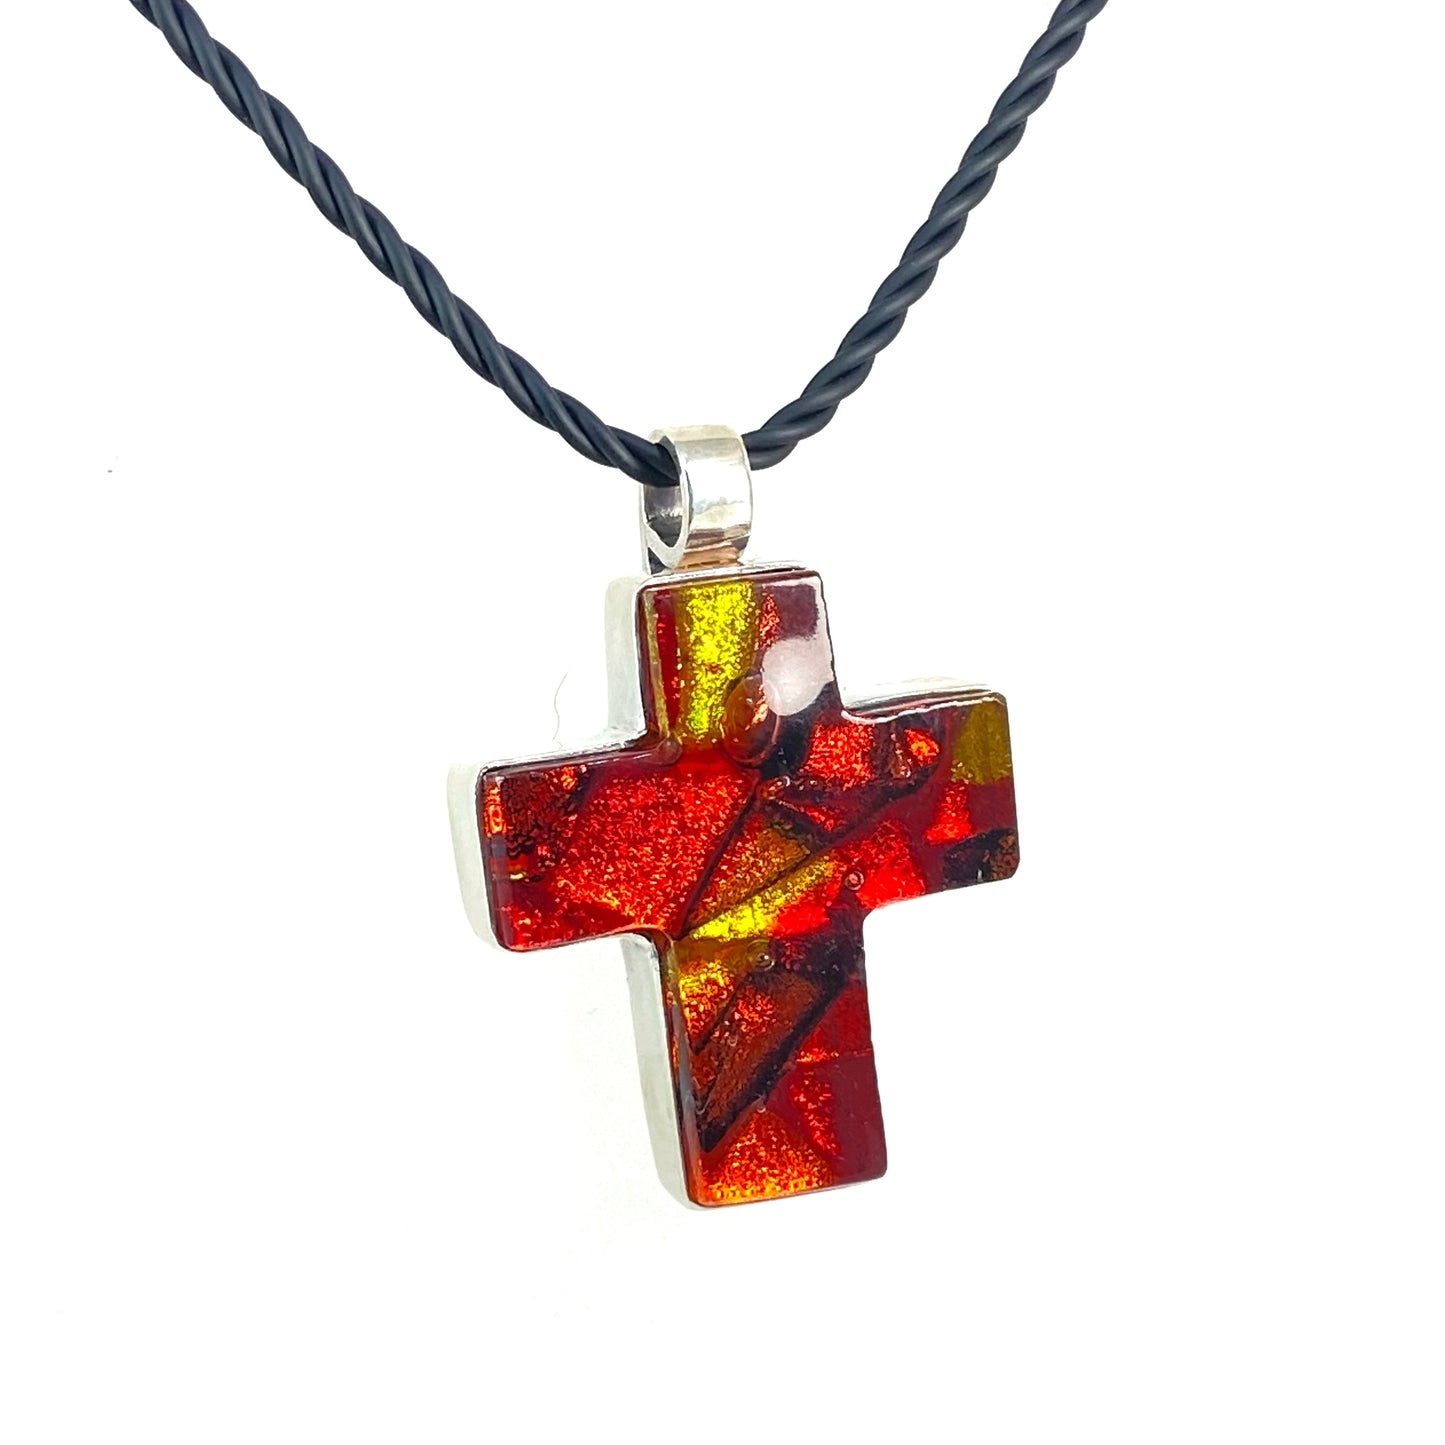 Sun melange mixture of red, gold and orange glass, ,fused glass in a cross shape necklace, glass jewelry, glass and silver jewelry, handmade, handcrafted, American Craft, hand fabricated jewelry, hand fabricated jewellery, Athen, Georgia, colorful jewelry, sparkle, bullseye glass, dichroic glass, art jewelry